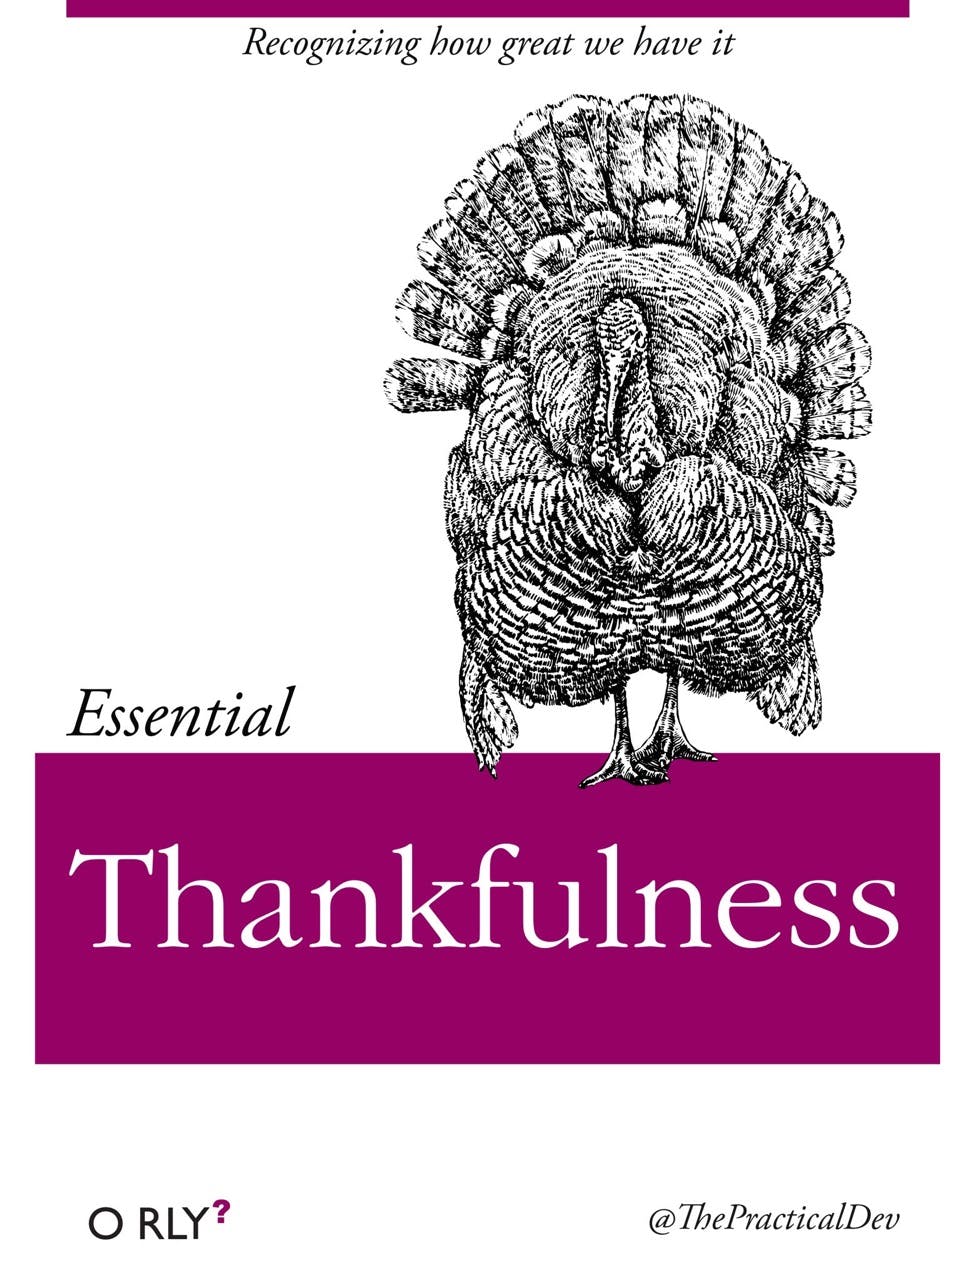 Thankfulness | Recognizing how great we have it